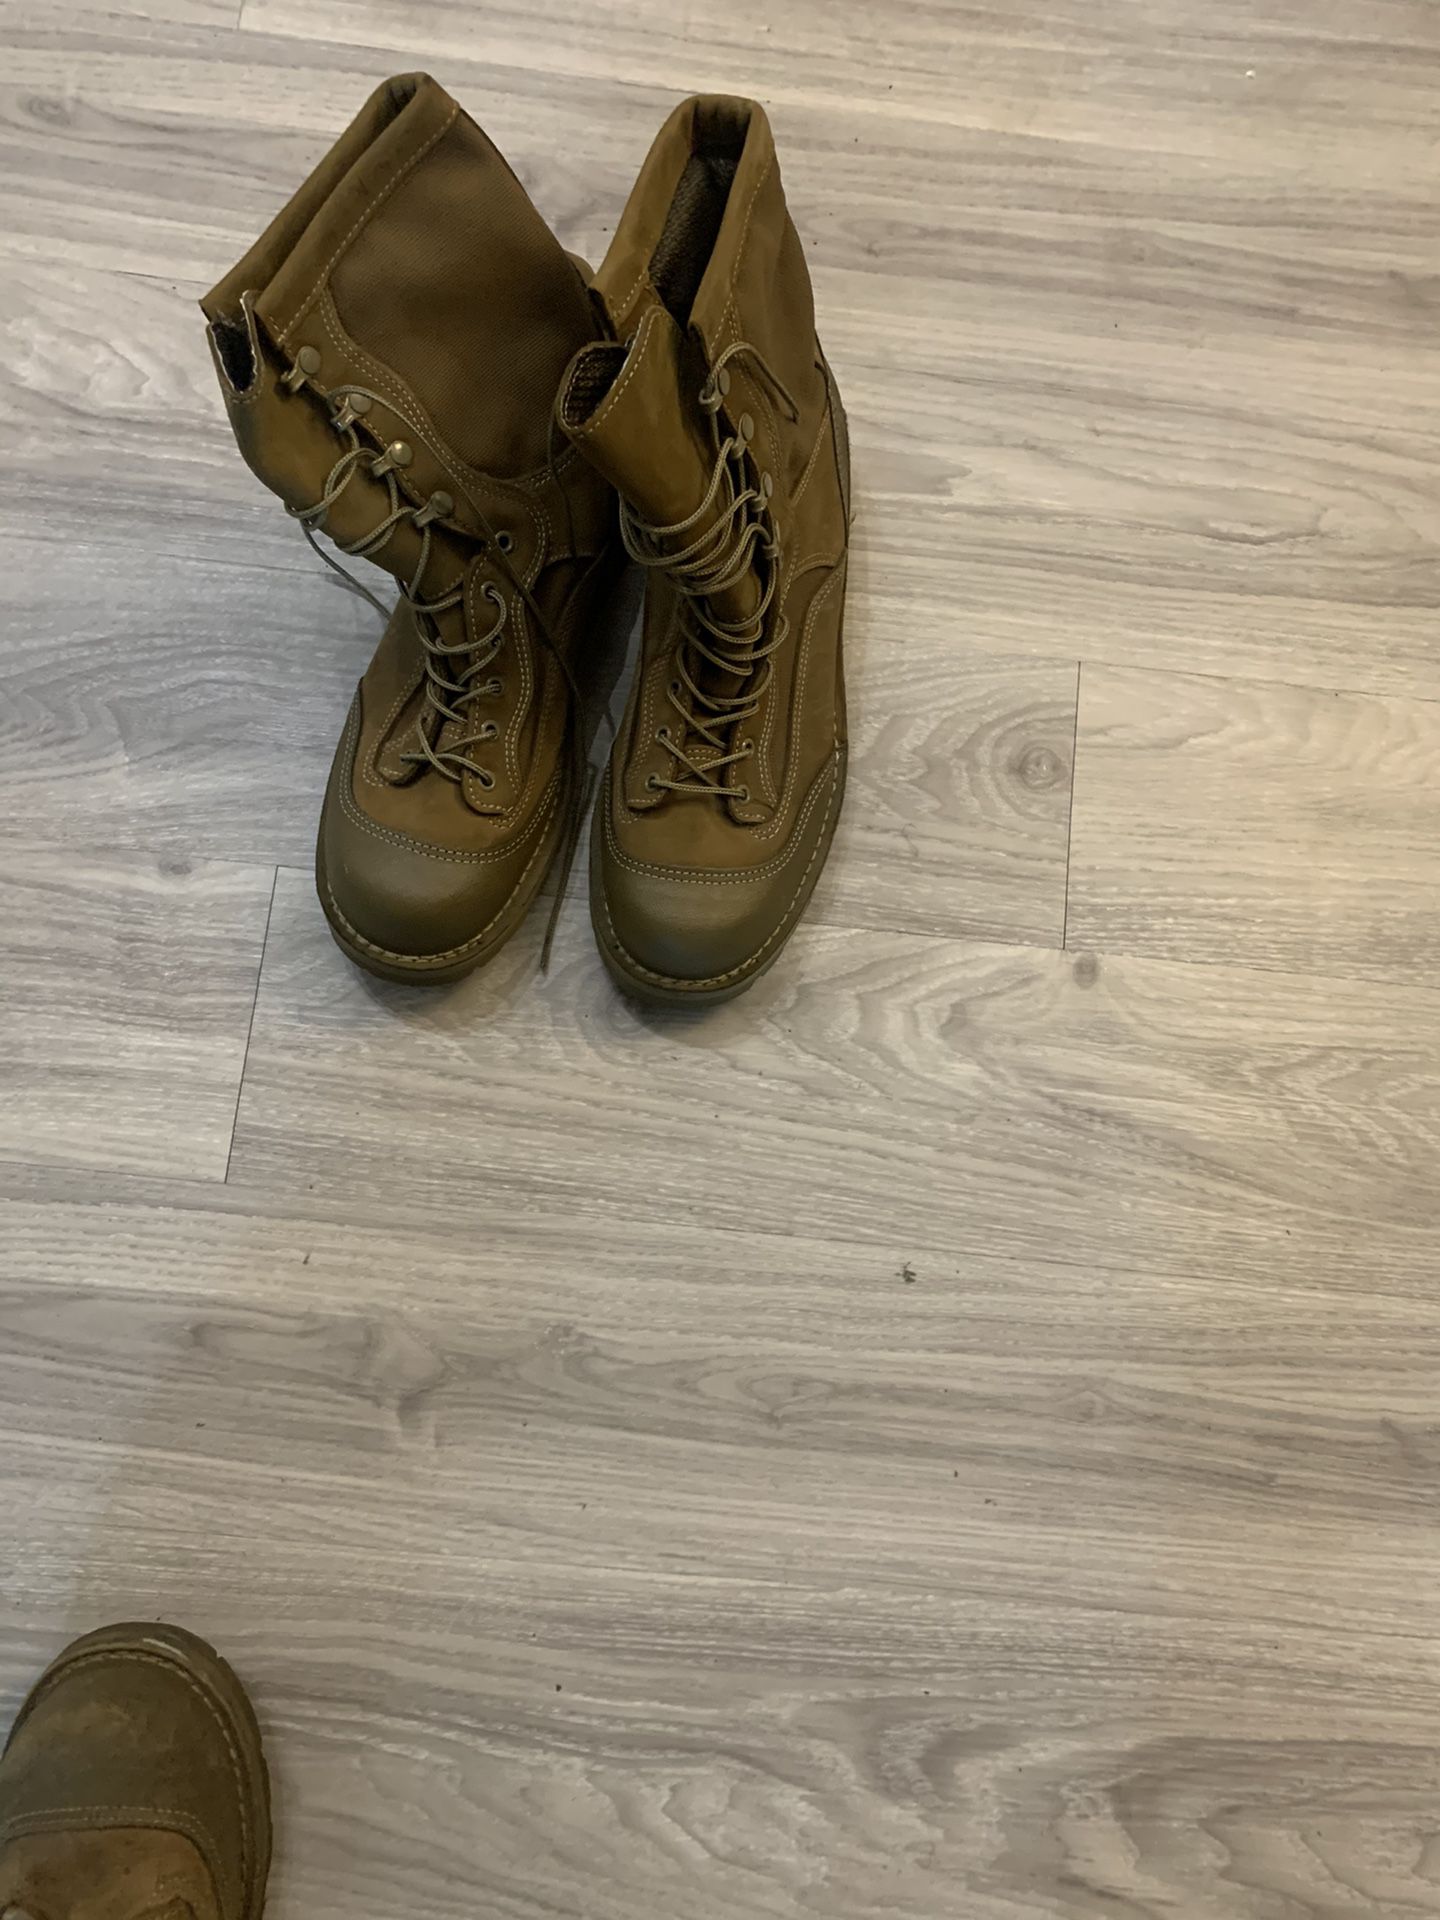 12.5 Danner Military grade Boots